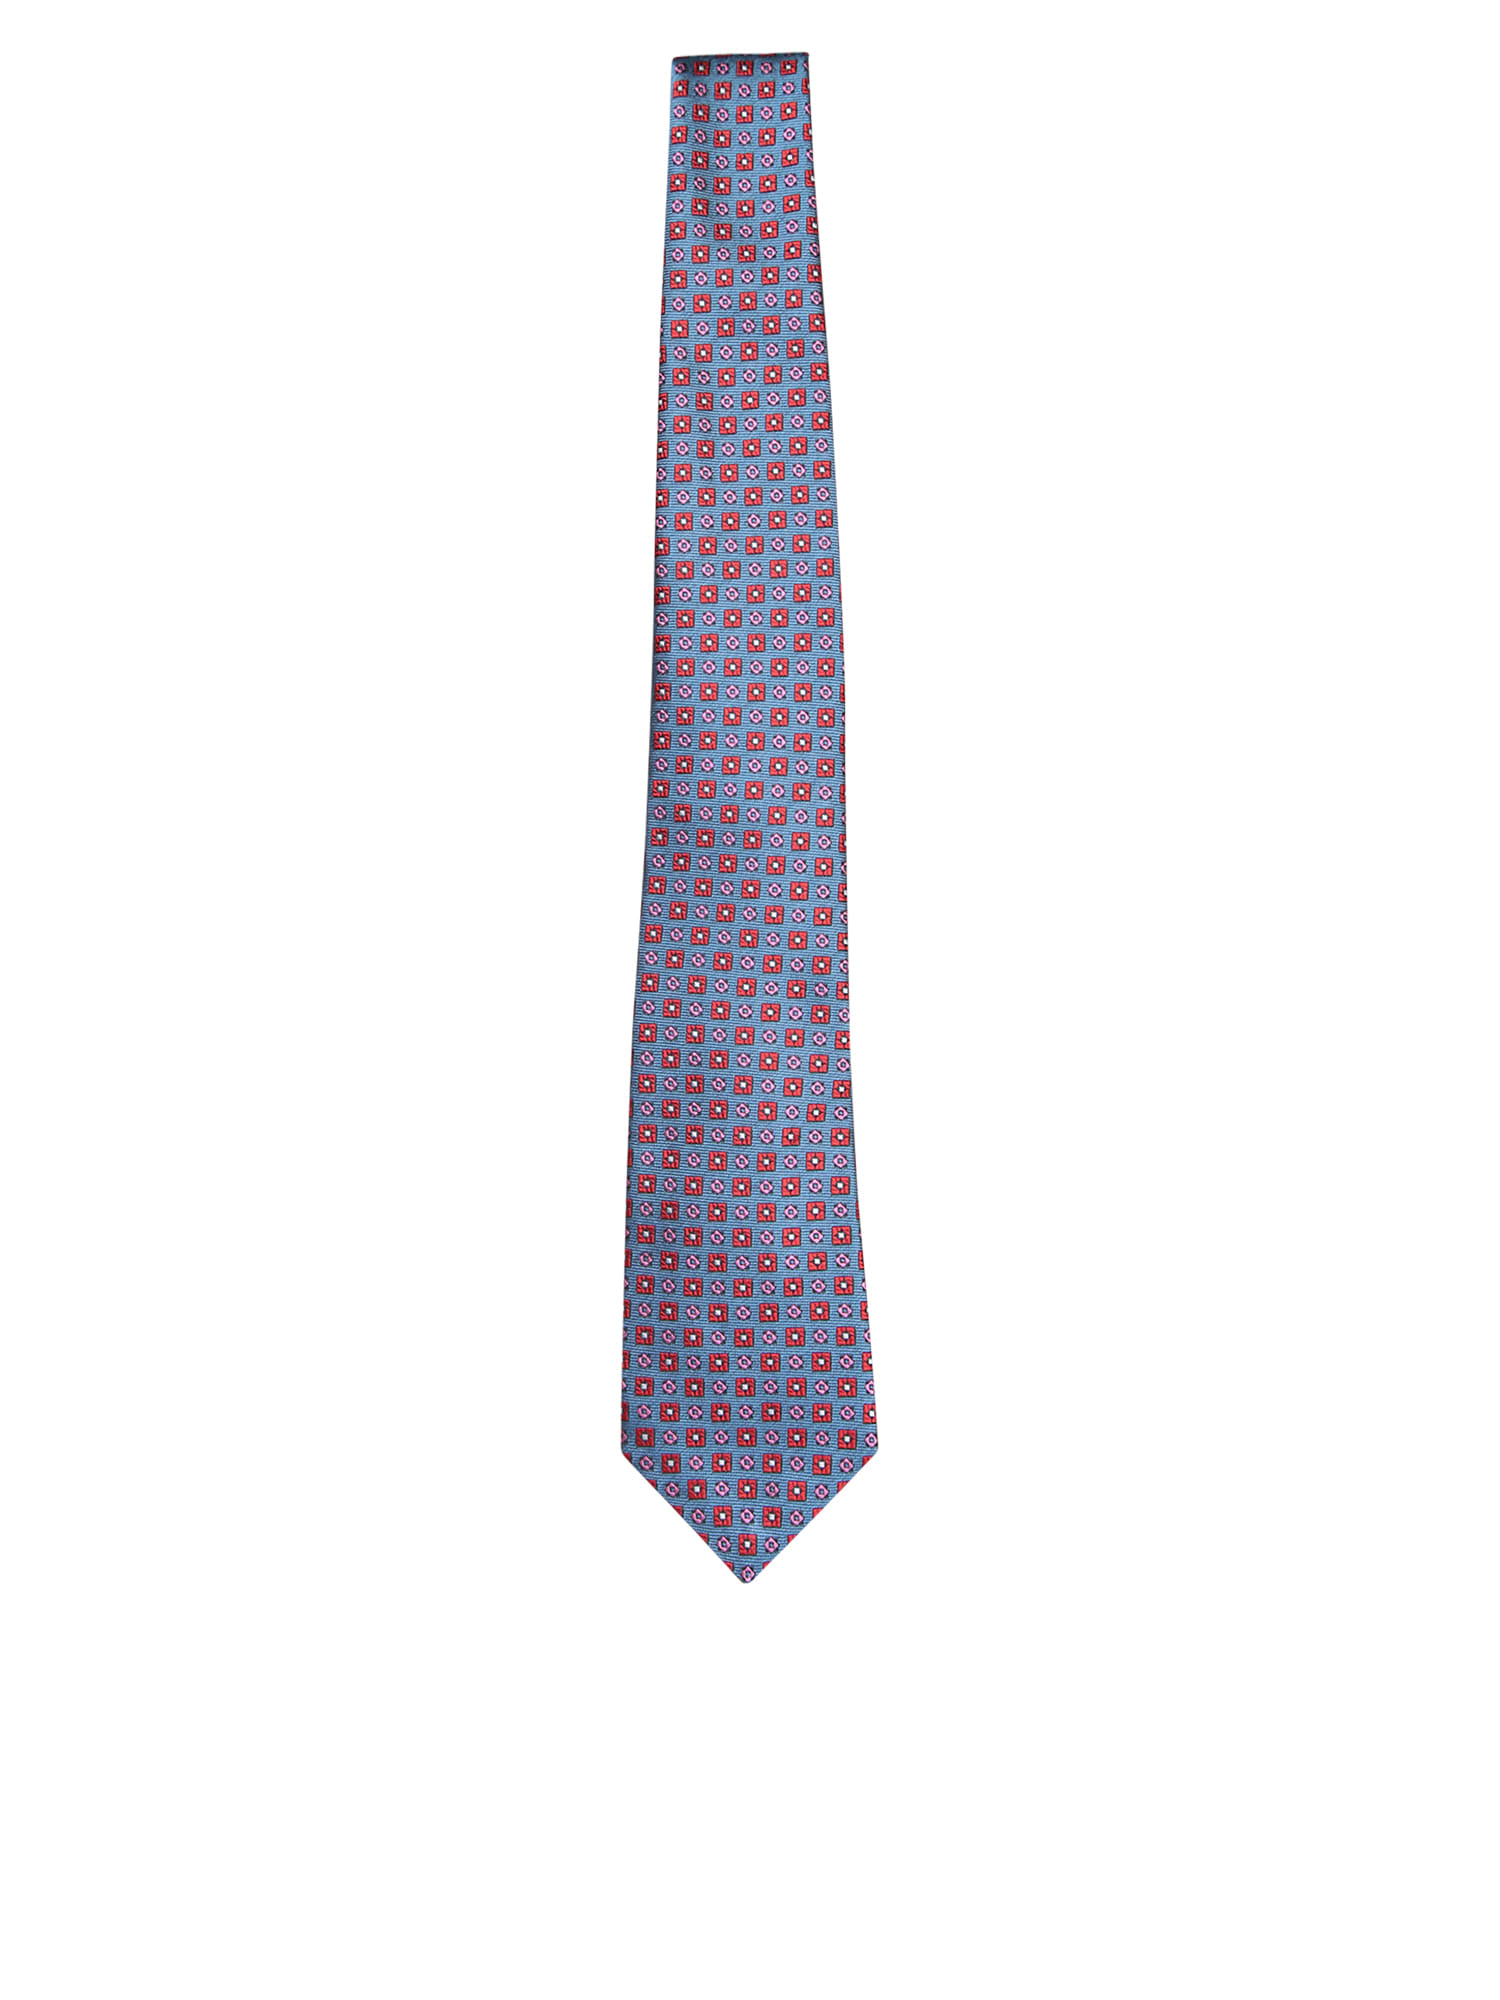 Blue/red/fuchsia Patterned Tie